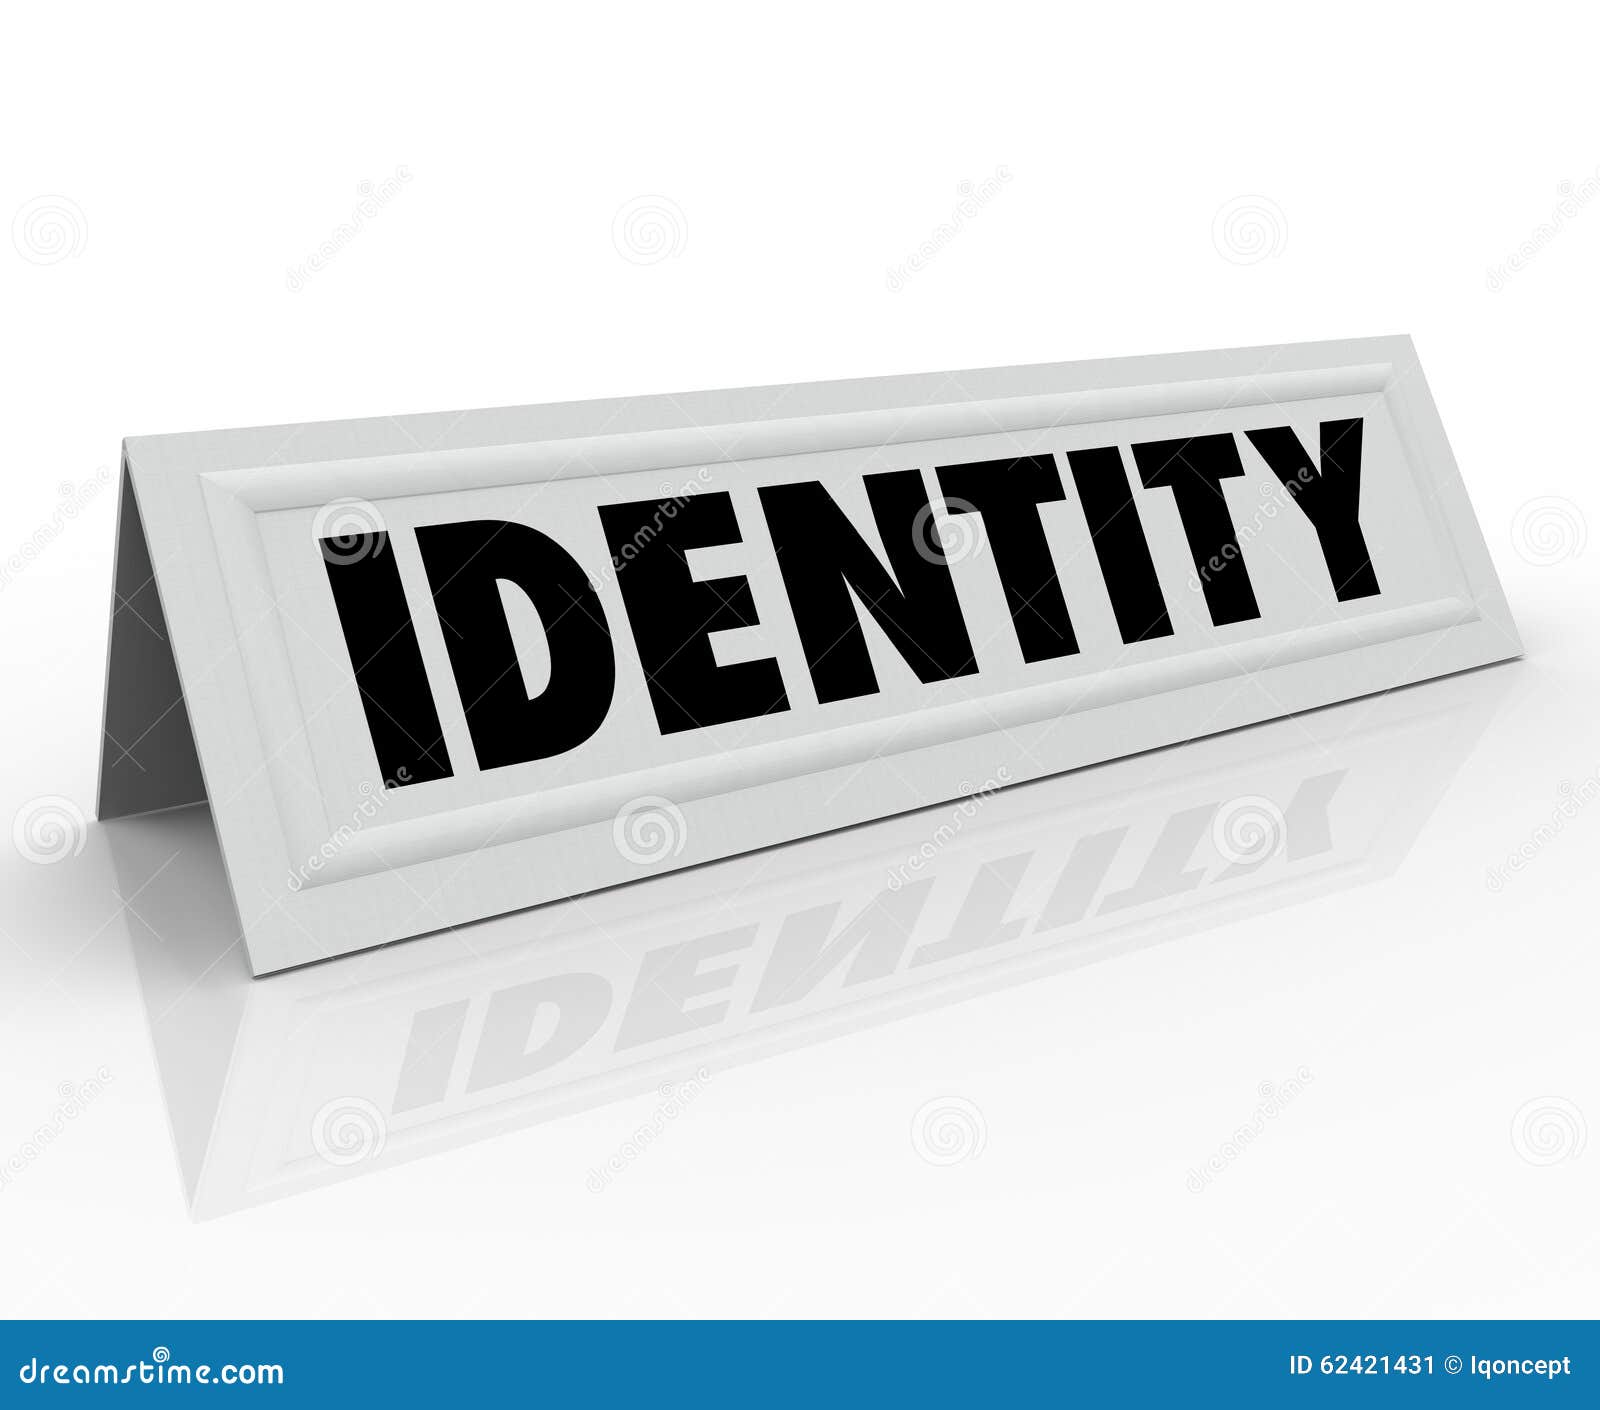 identity personal character distinctive name tent card